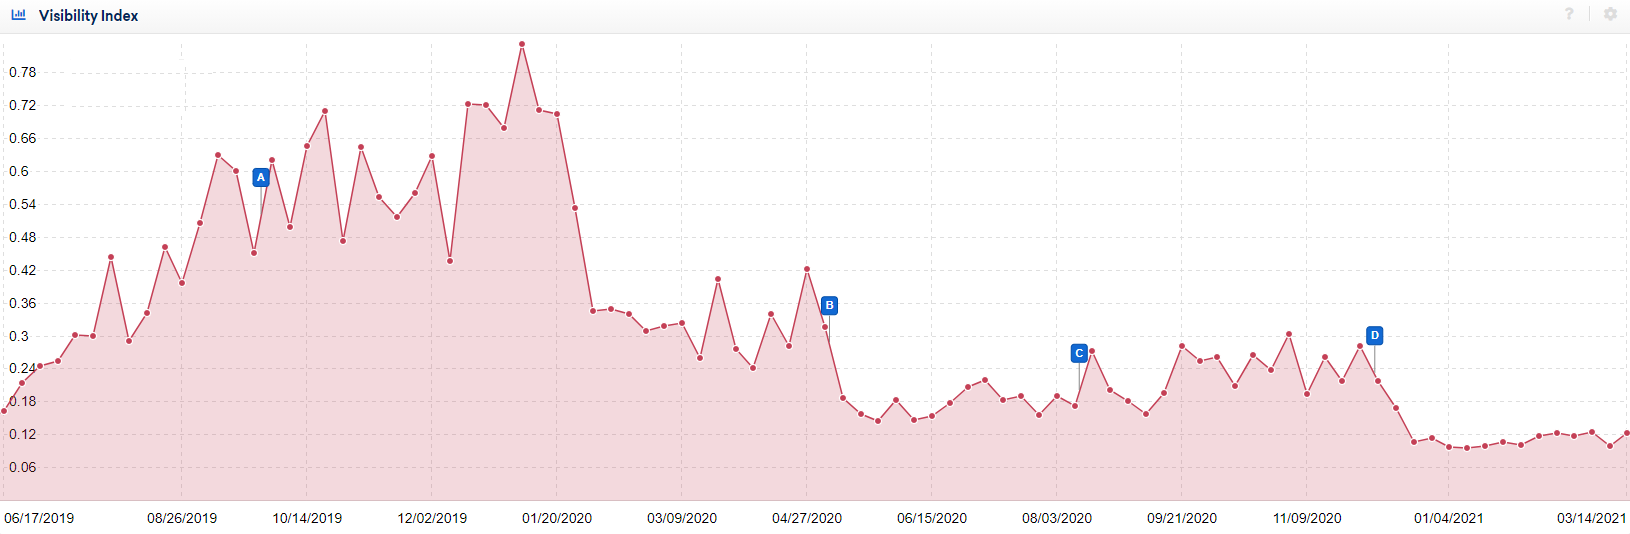 News aggregator website declining in organic visibility on Google.